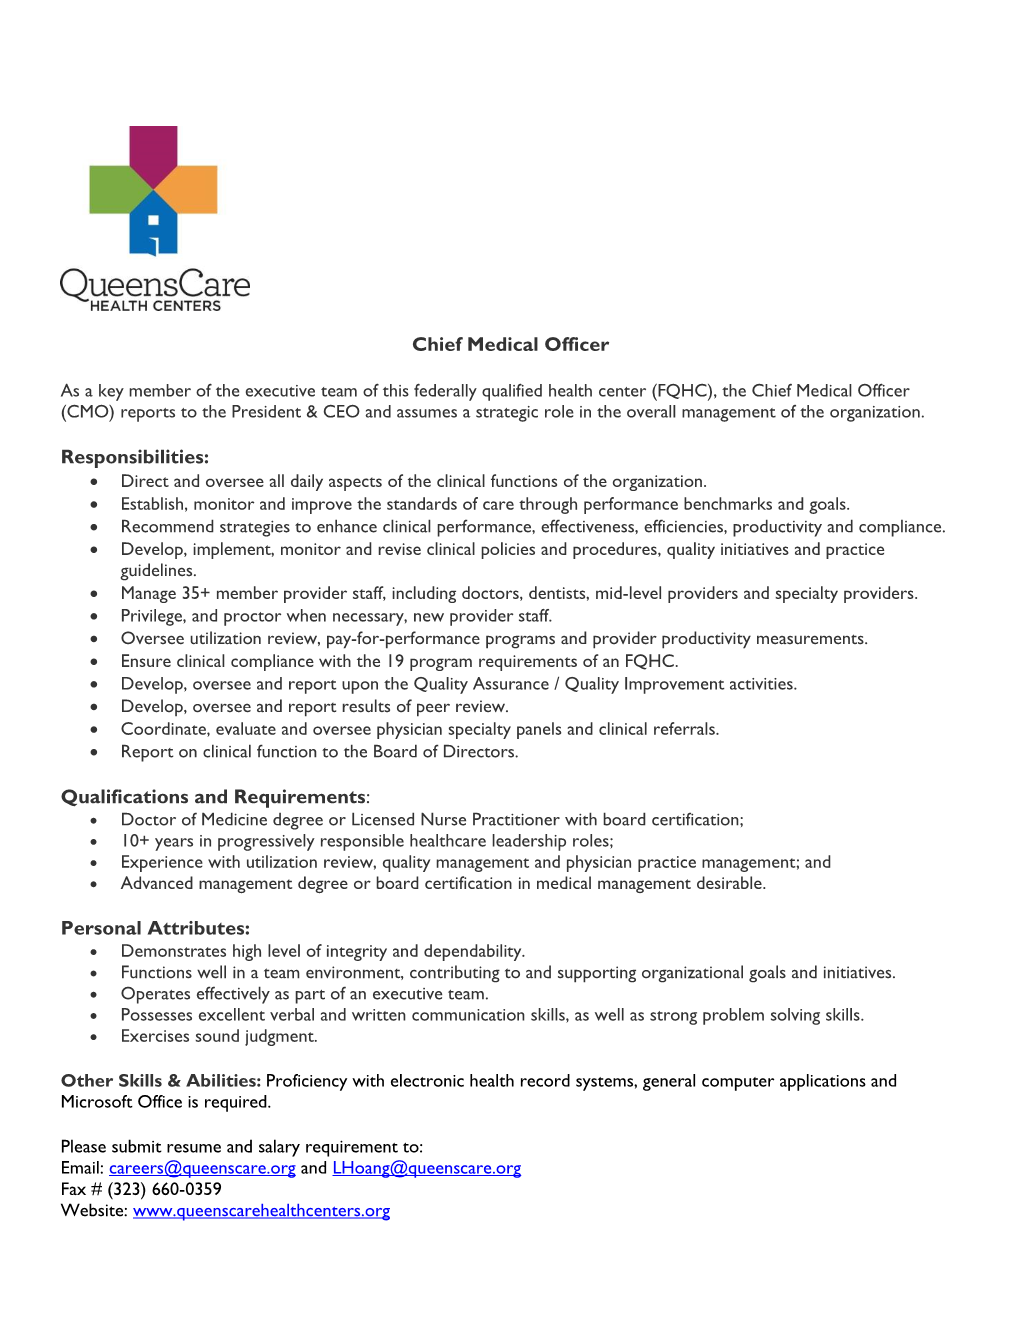 Chief Medical Officer Responsibilities: Qualifications and Requirements: Personal Attributes